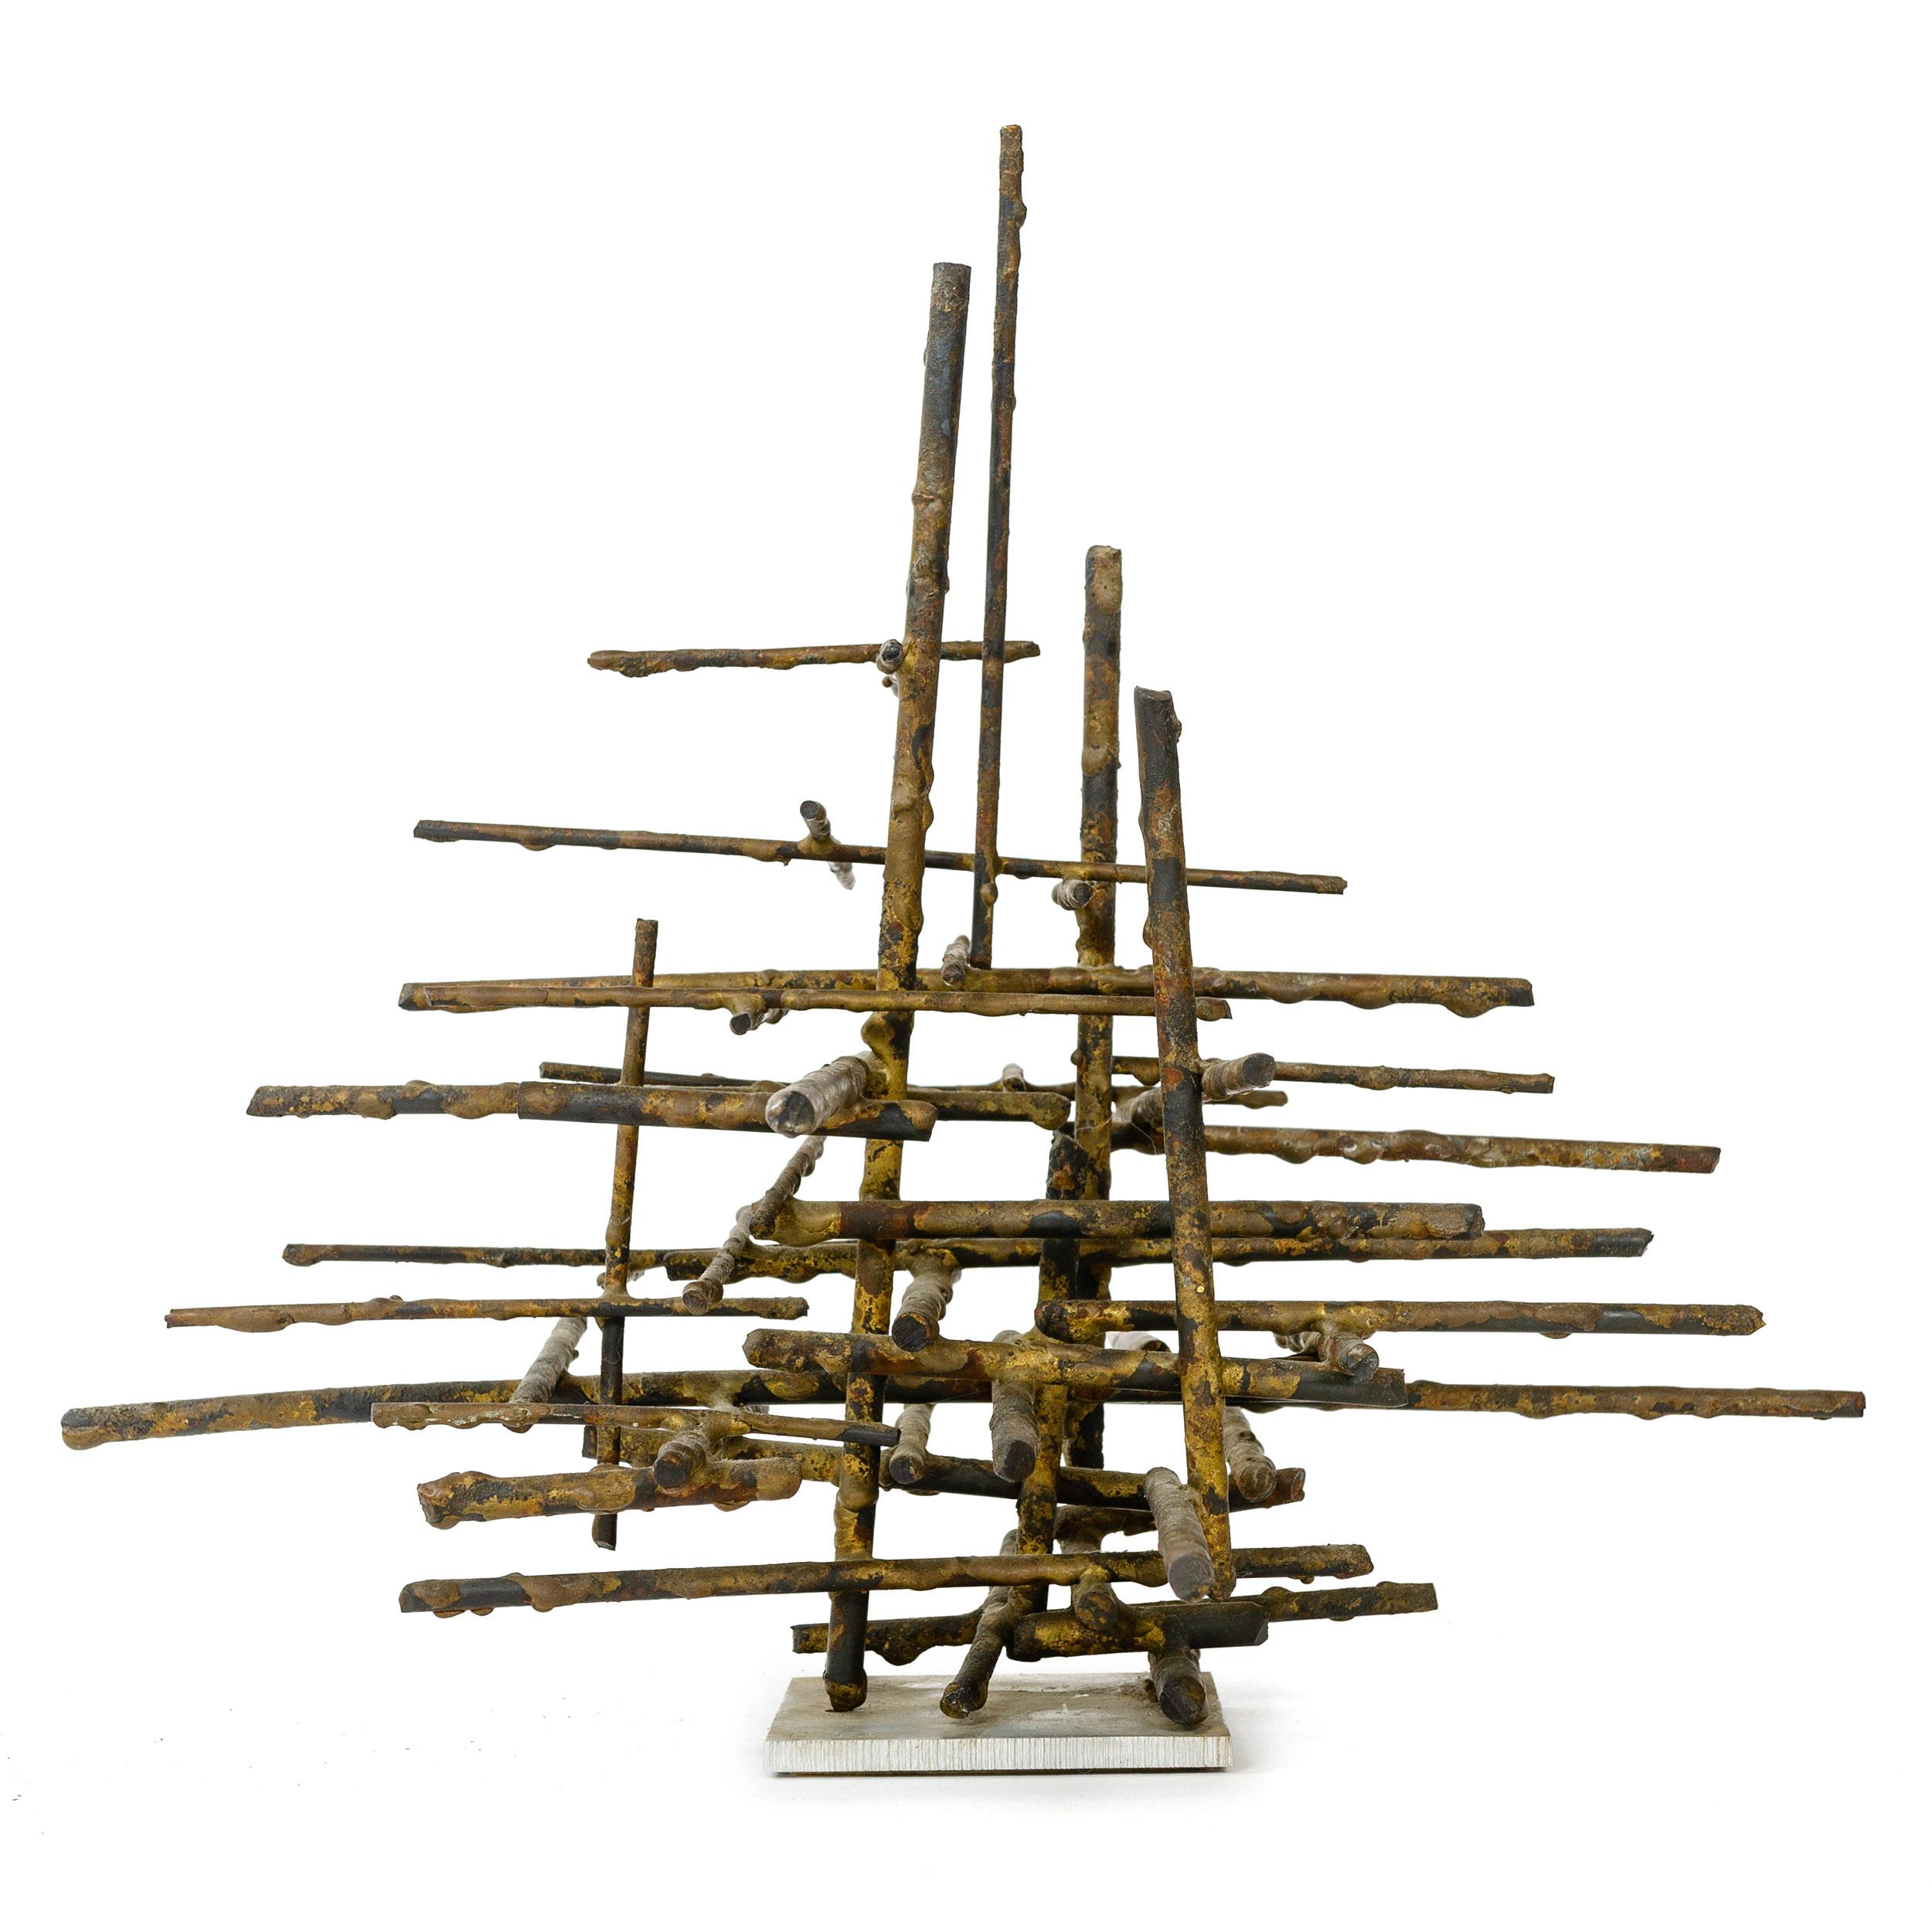 Brutalist tabletop sculpture being a linear assemblage of bronze twig like rods of varying lengths stacked on a square aluminum base. Letters 'HF' and '64' etched in to the base in a modern sans serif font.